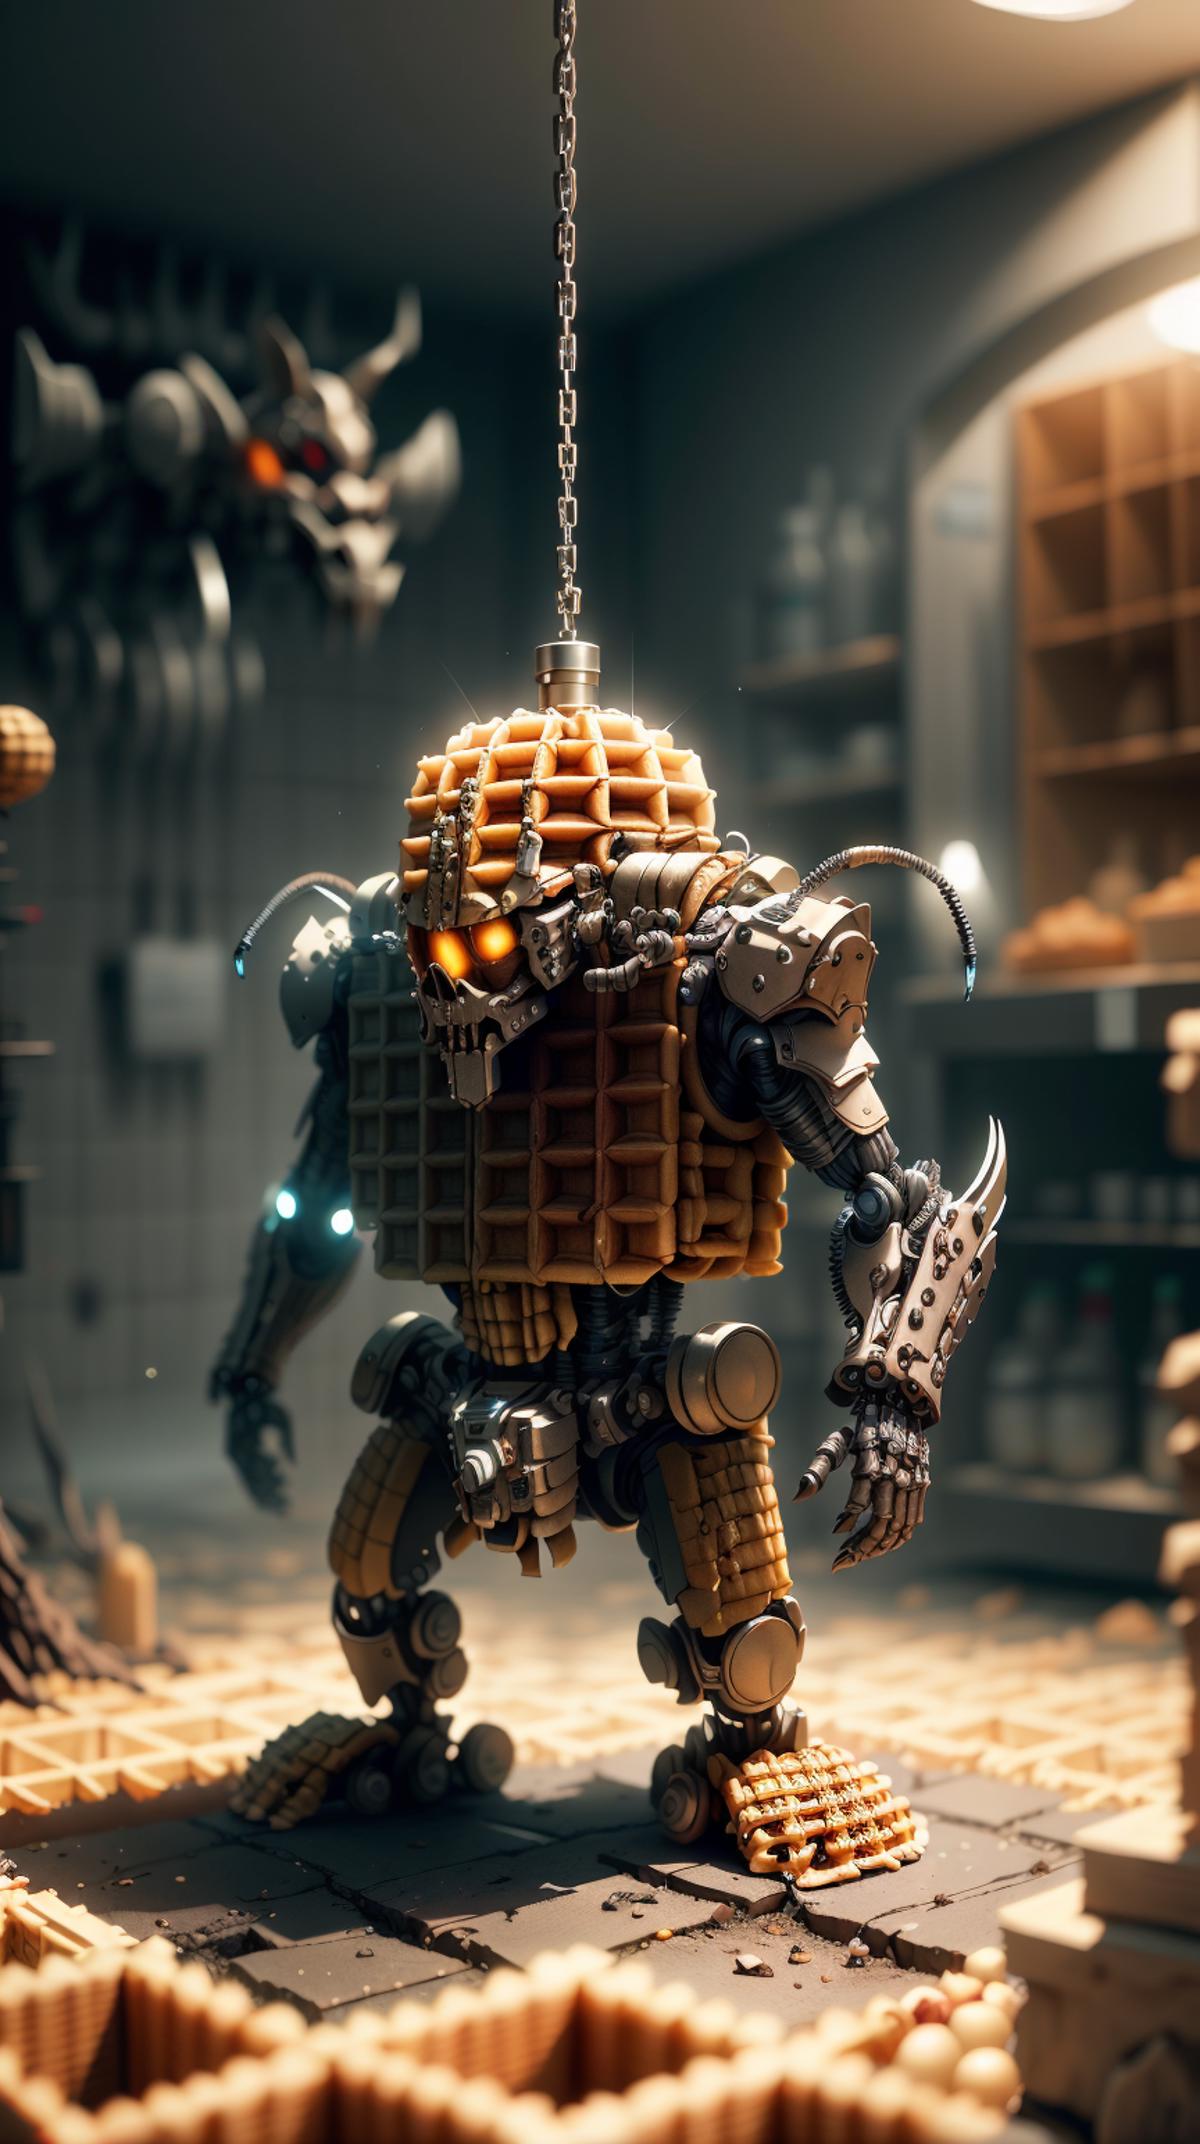 WaffleStyle - Turn anything into a waffle! image by mnemic